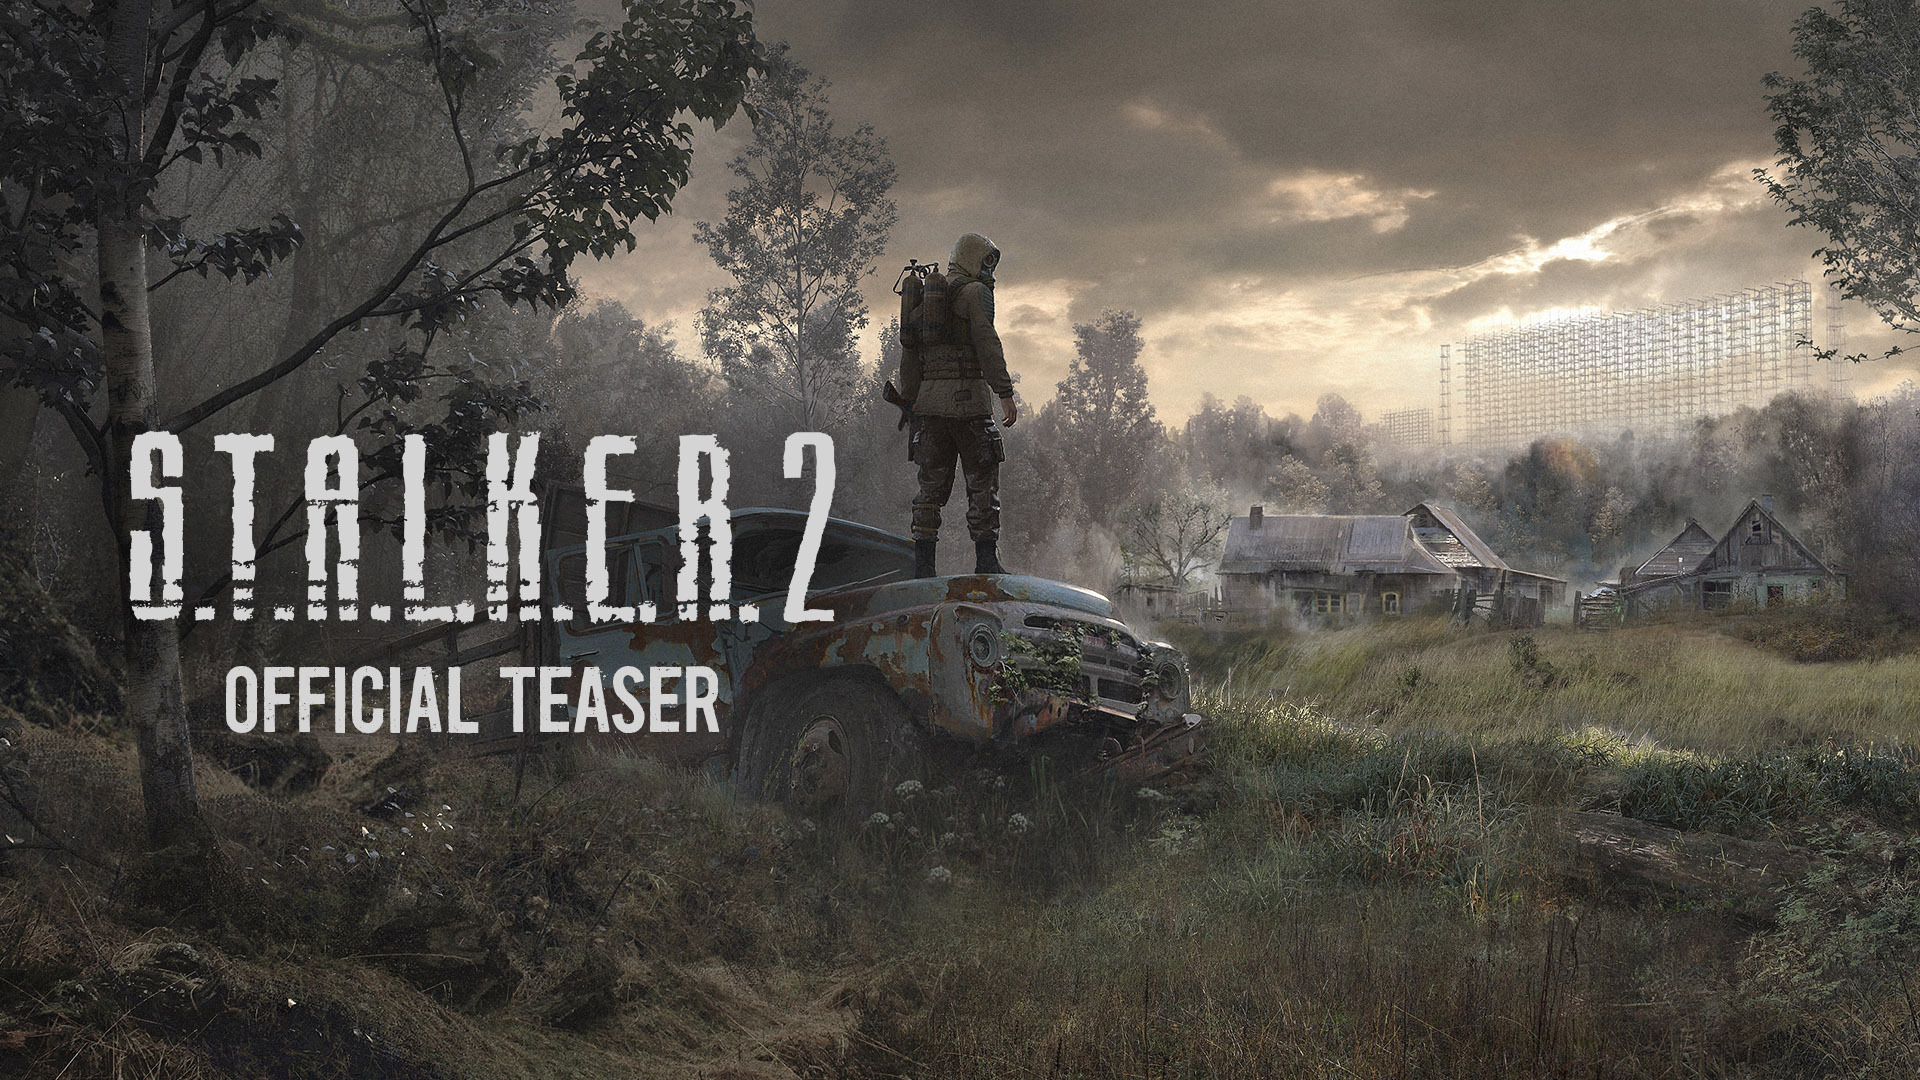 STALKER 2: Going Hands-on With the First Ever Playable Demo - Xbox Wire